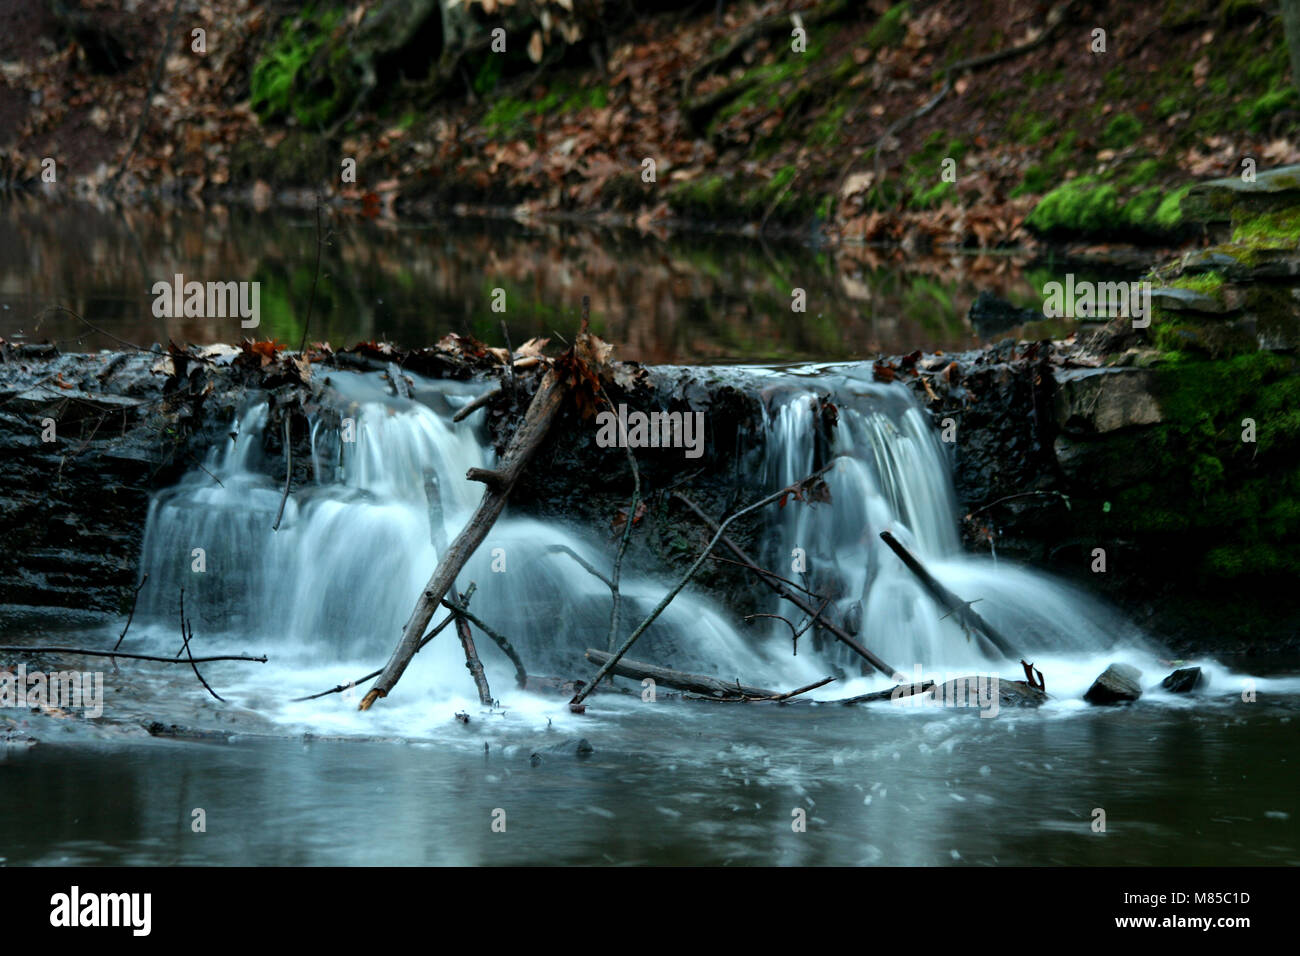 A small flowing waterfall image Stock Photo